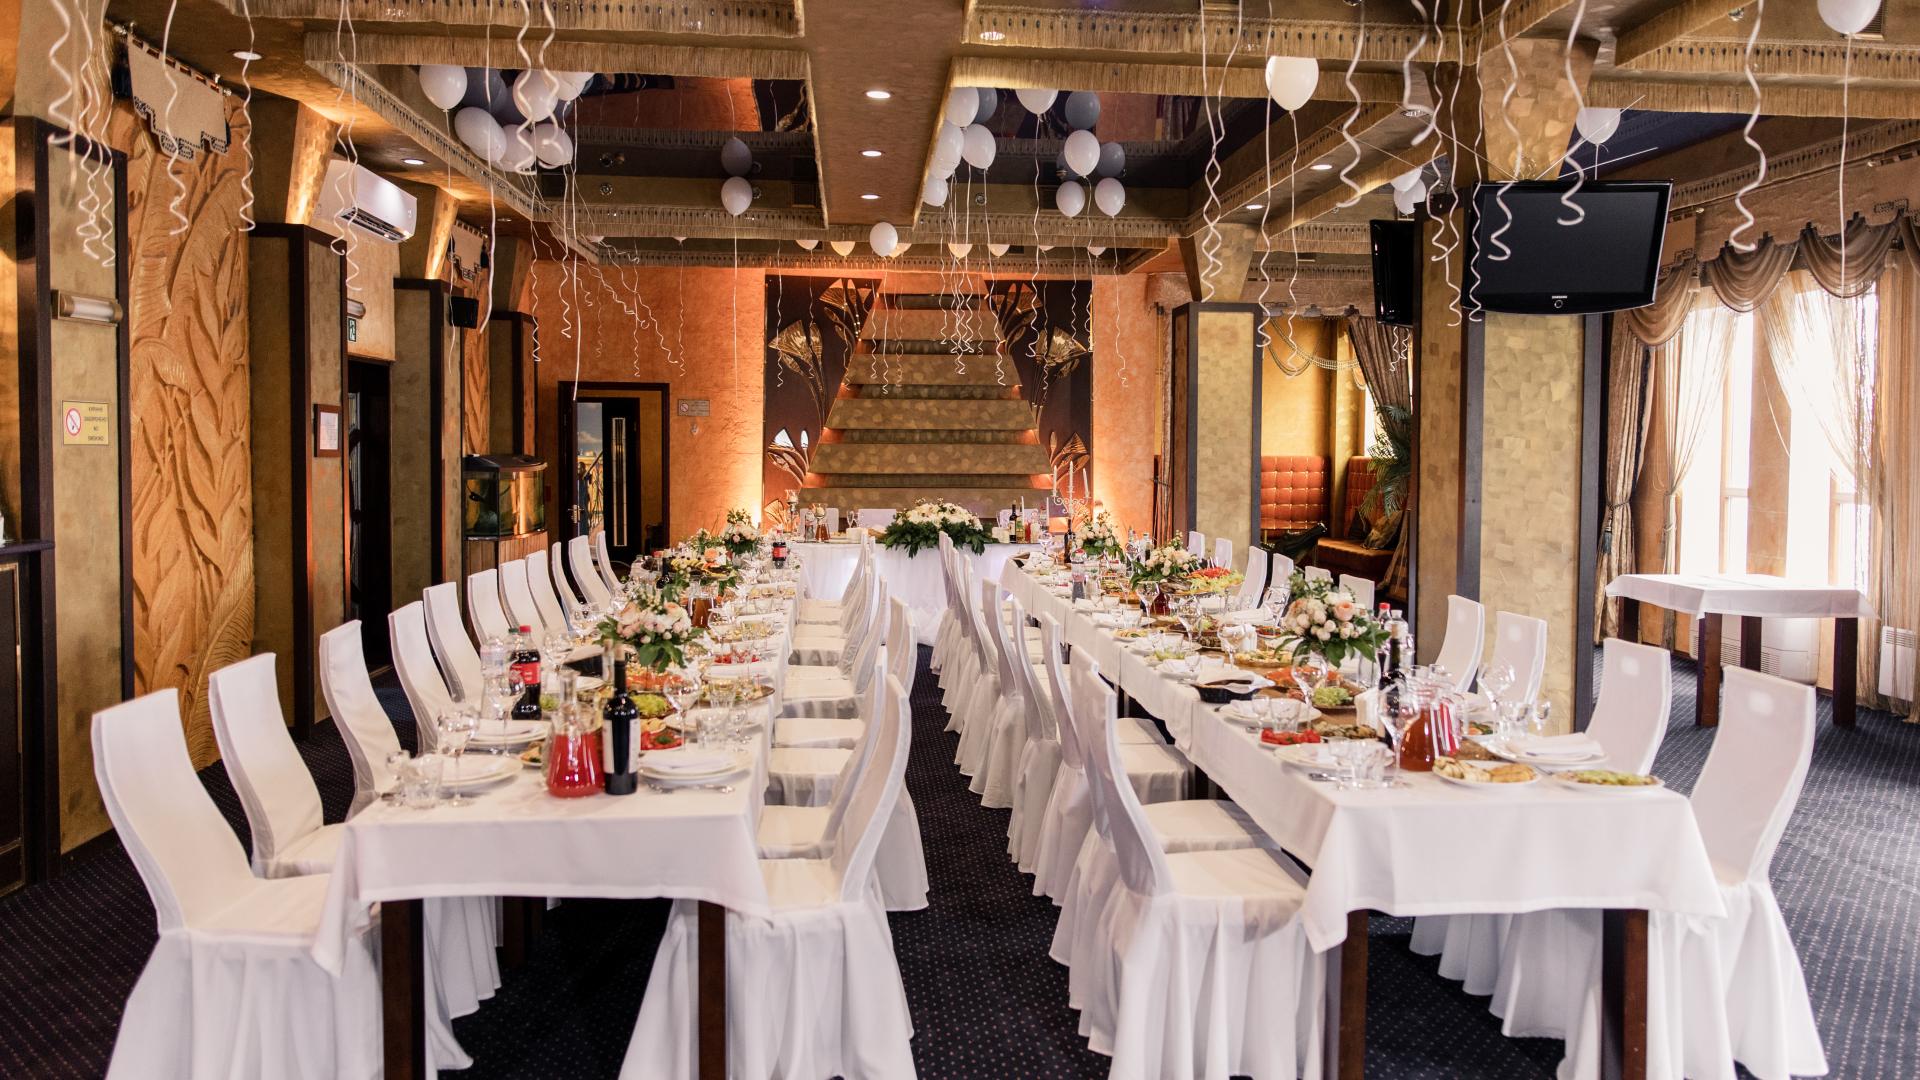 Luxury Wedding Venues for Hire in Sydney